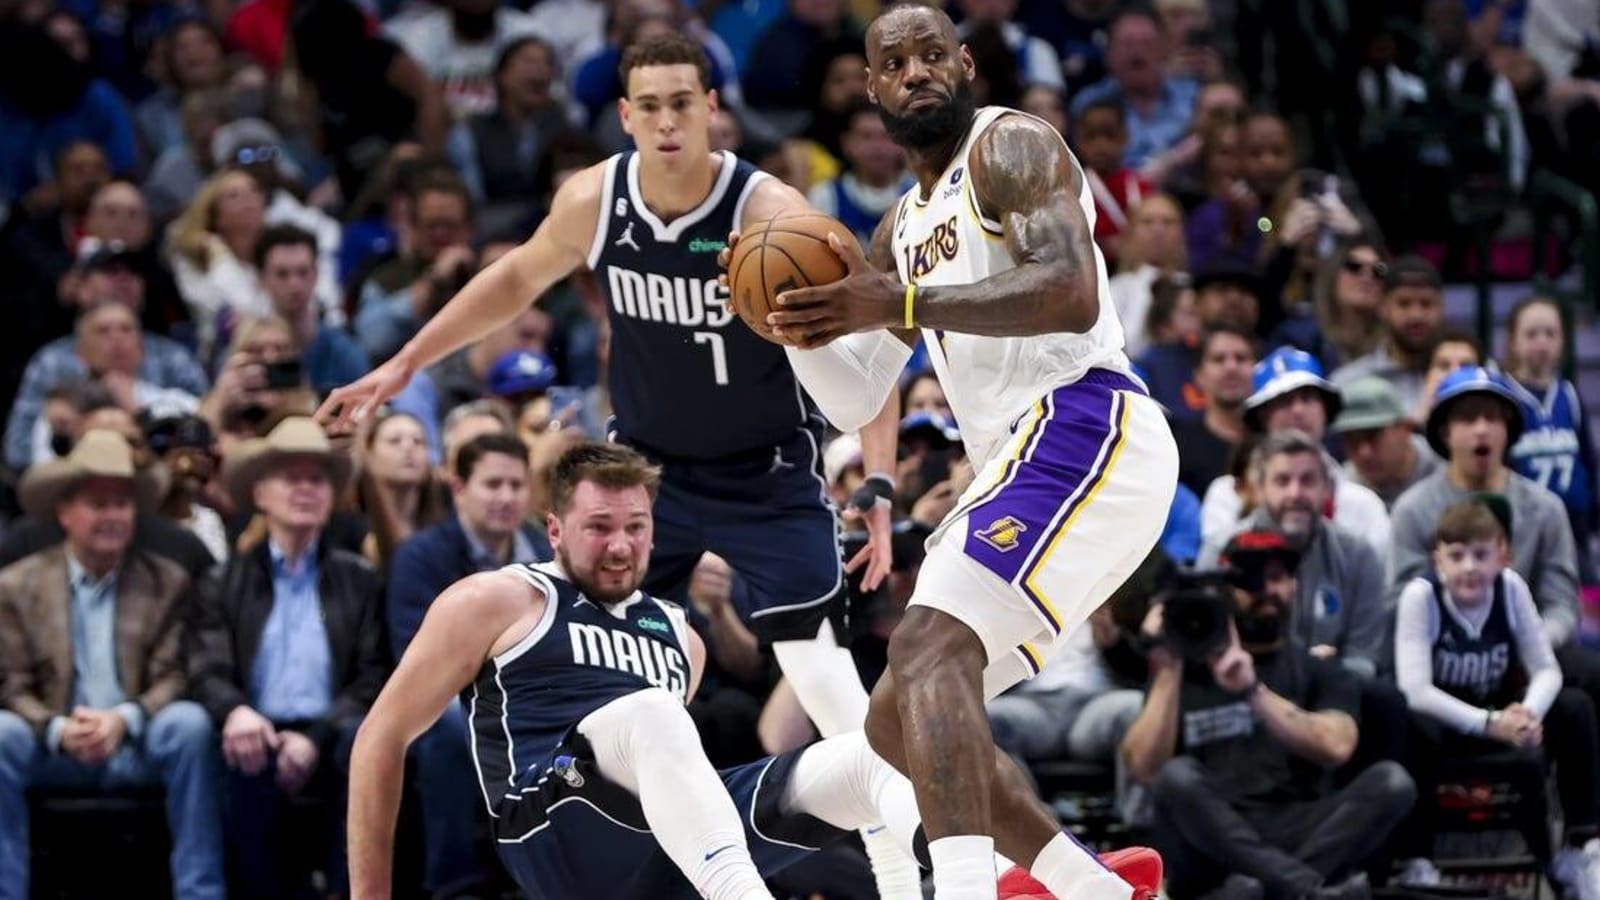 Lakers rally from 27 down to dispatch Mavericks